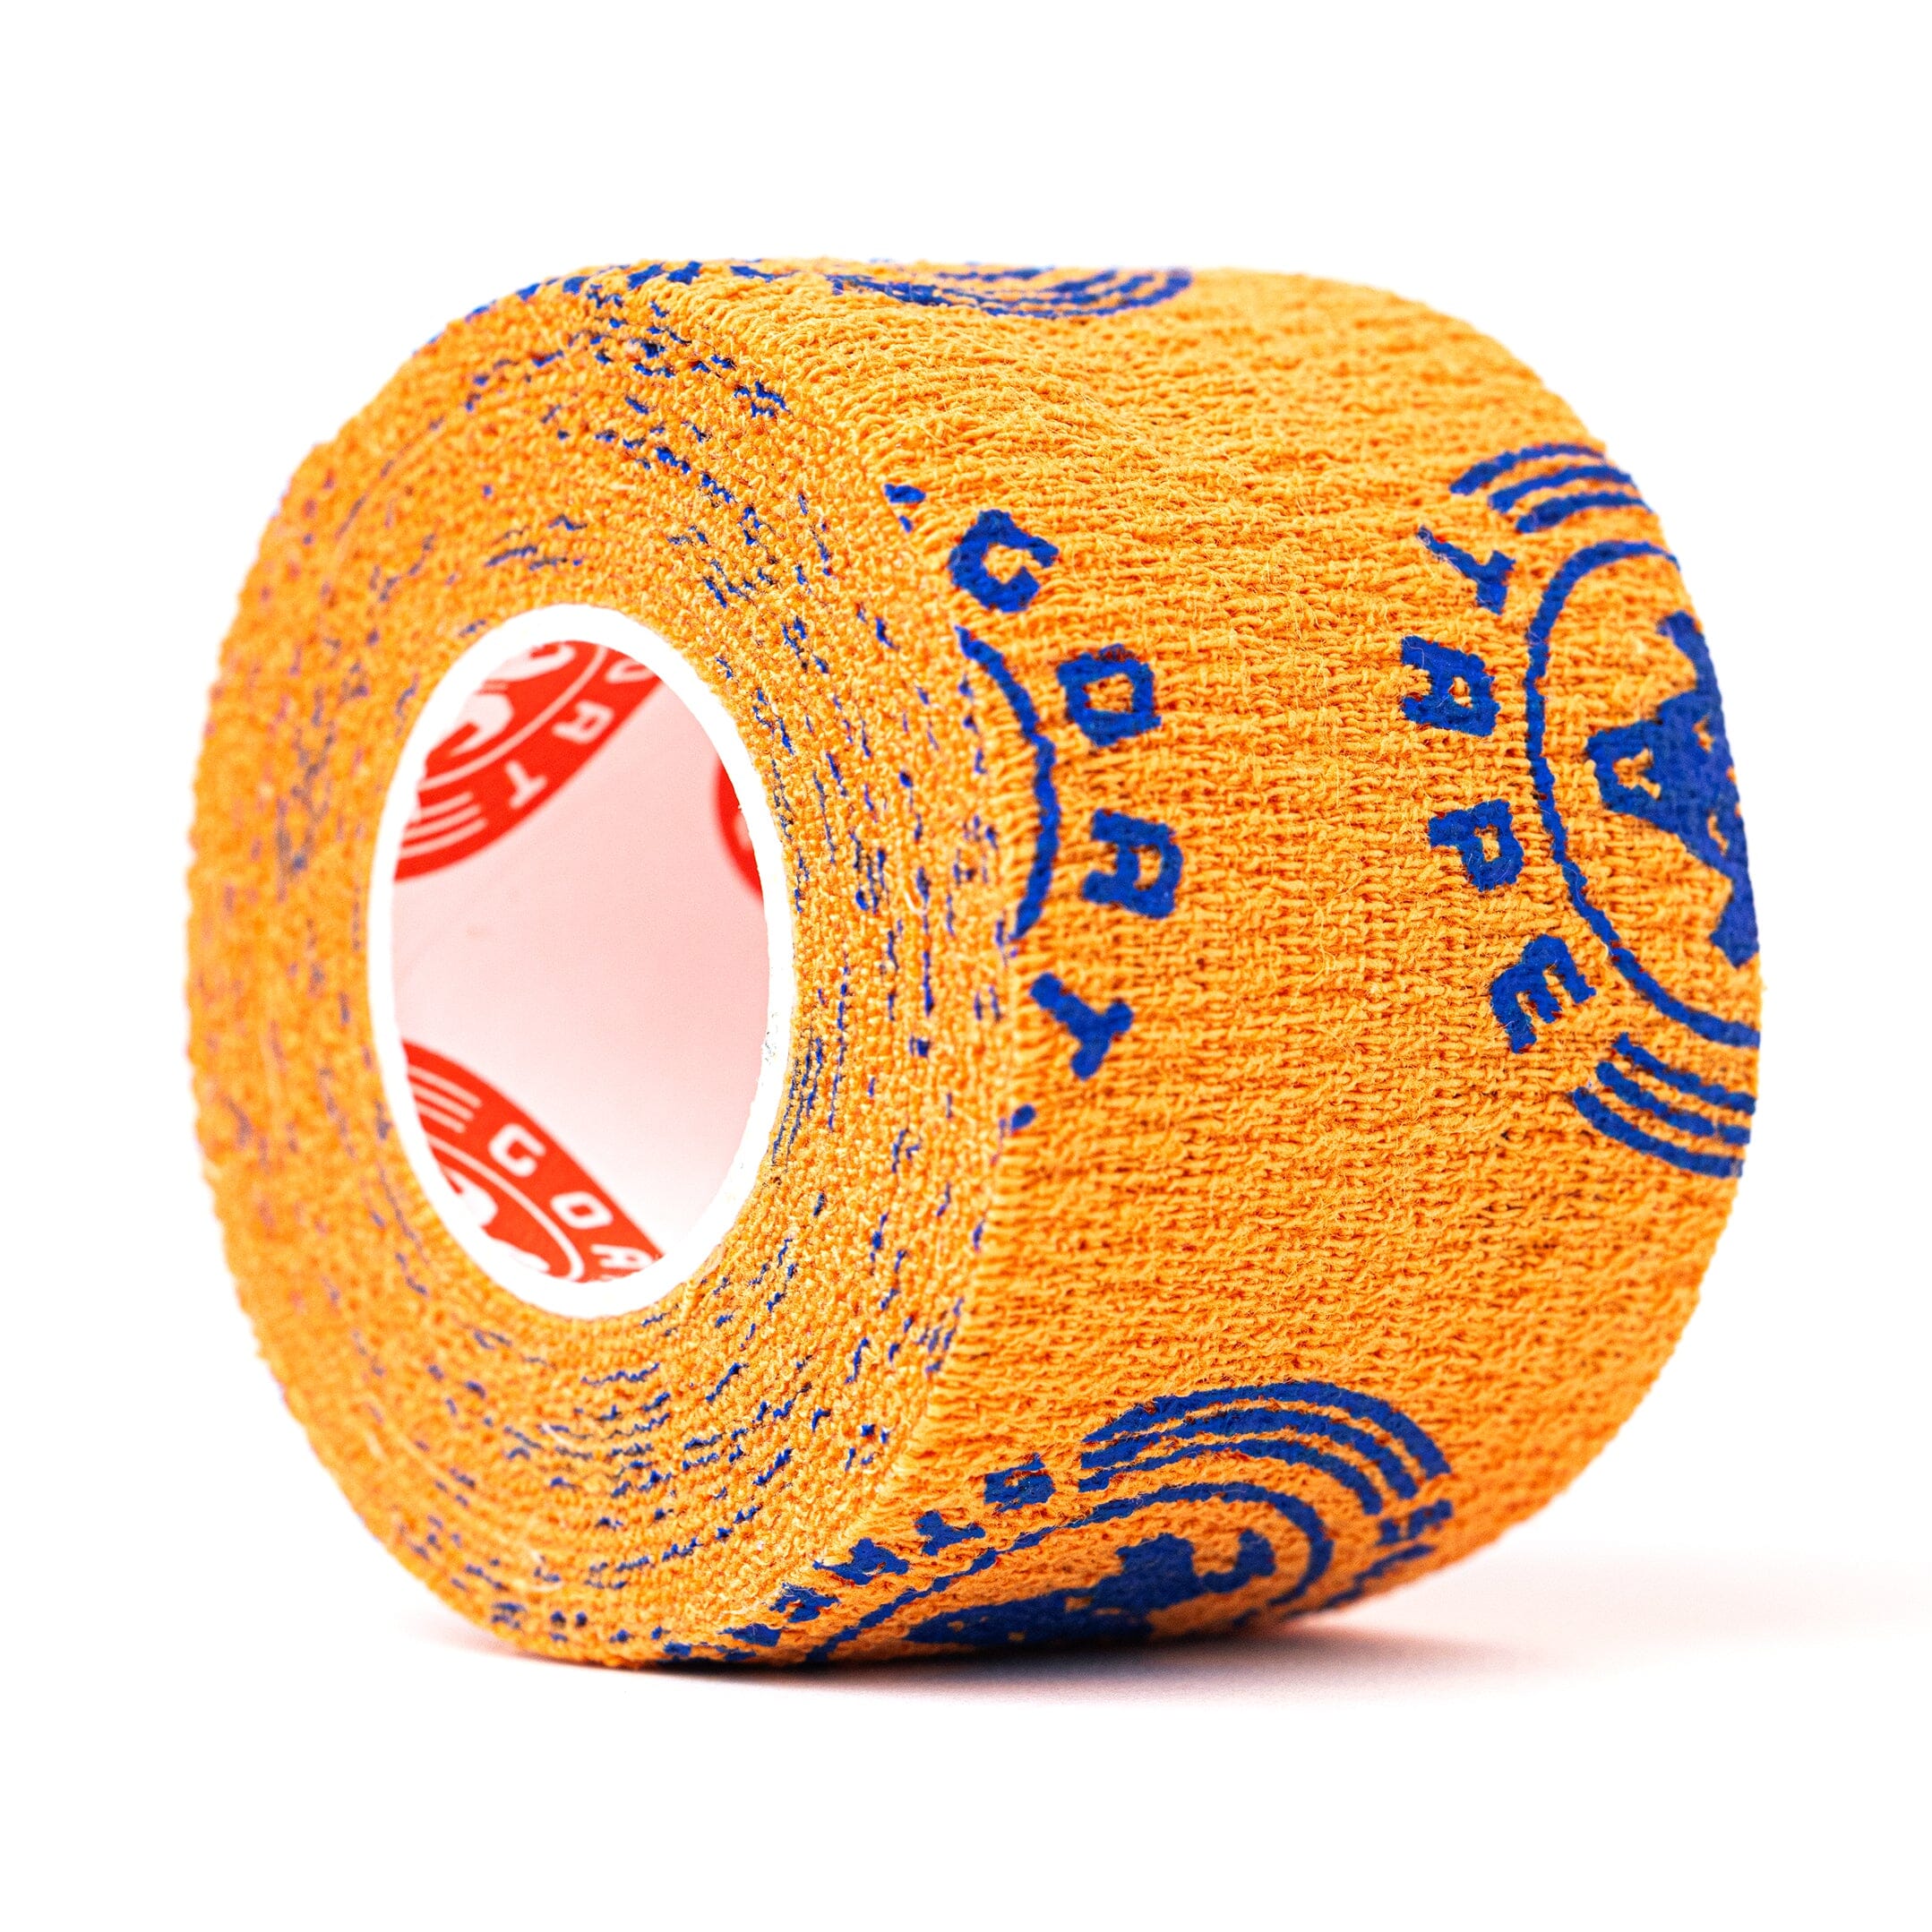 Goat Tape is excited to announce our partnership with Elite Dodgeball